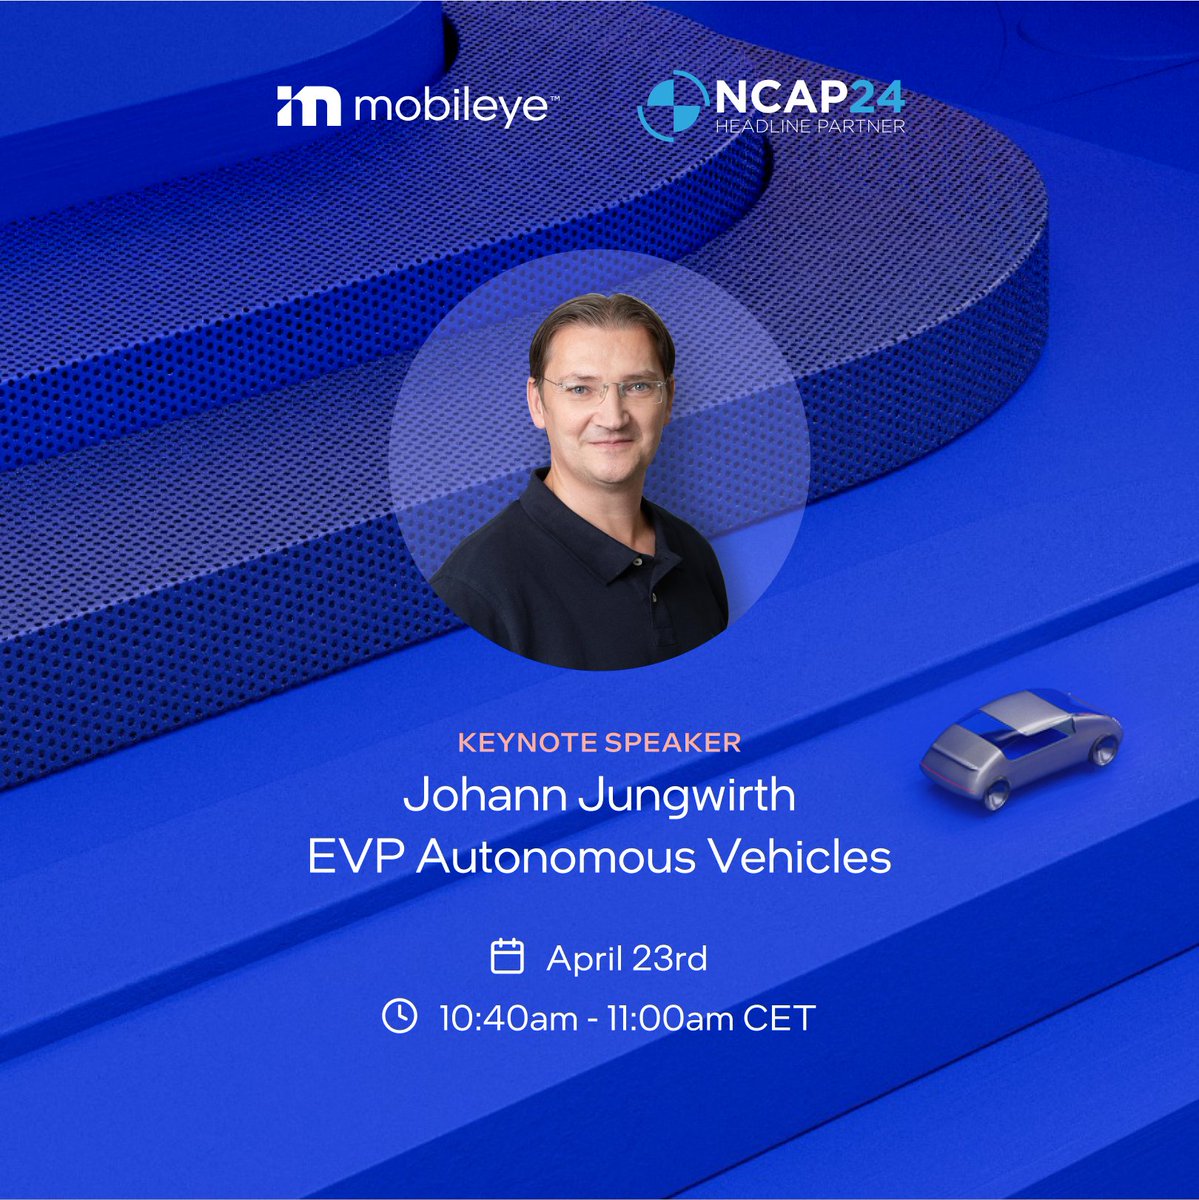 Join us next week in Munich at the inaugural #NCAP24! As the Headline Partner of the @GlobalNCAP World Congress, we are excited to be delivering the opening keynote speech by @JohannJungwirth. On the 2nd day of the event, our Senior Director of ADAS Business Development, Yoni…